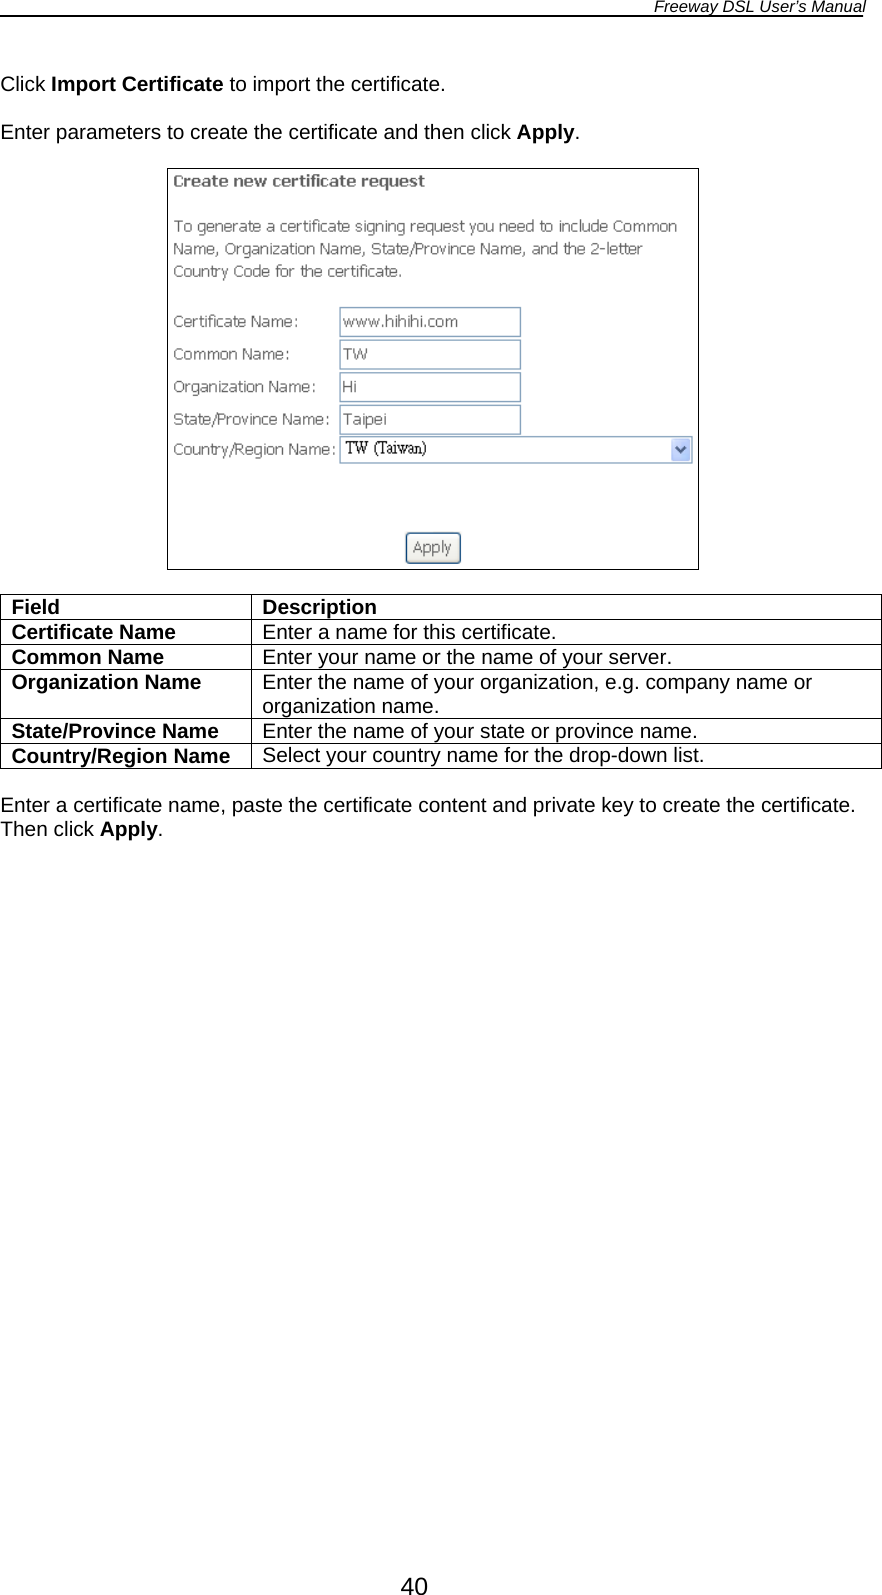 Freeway DSL User’s Manual  40 Click Import Certificate to import the certificate.  Enter parameters to create the certificate and then click Apply.    Field Description Certificate Name  Enter a name for this certificate. Common Name  Enter your name or the name of your server. Organization Name  Enter the name of your organization, e.g. company name or organization name. State/Province Name  Enter the name of your state or province name. Country/Region Name  Select your country name for the drop-down list.  Enter a certificate name, paste the certificate content and private key to create the certificate. Then click Apply.  